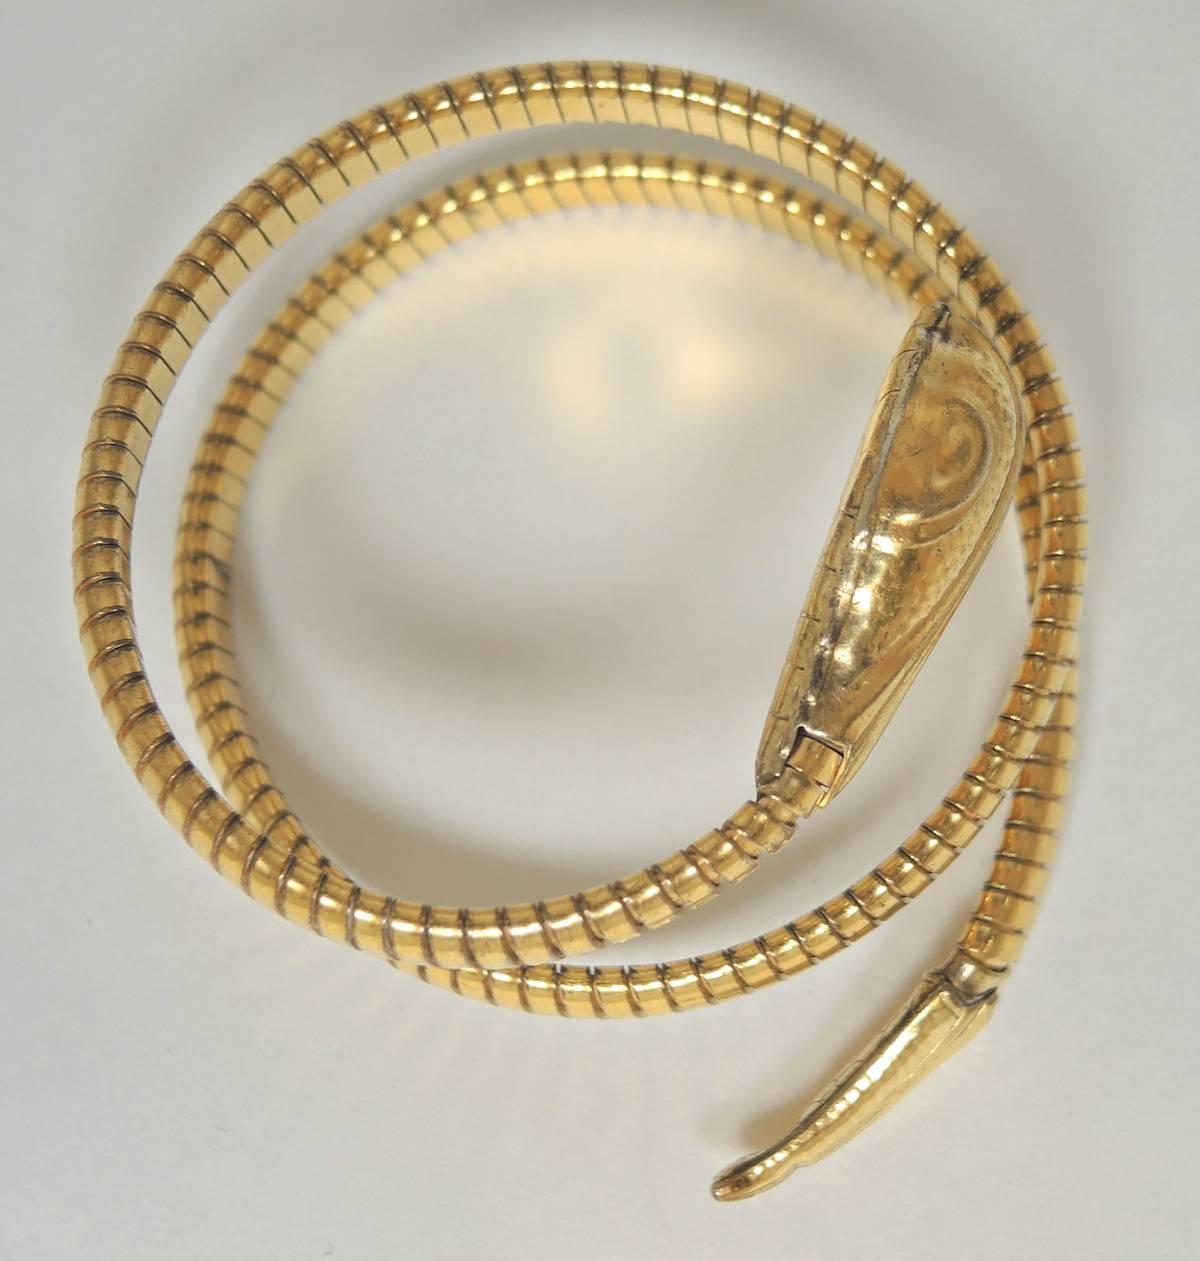 Everyone loves a serpent bracelet and I definitely love to collect them!  This vintage bracelet is very flexible and can be worn on the wrist or wrapped around the upper arm.  It is in a gold tone setting and has a ribbed design. This bracelet